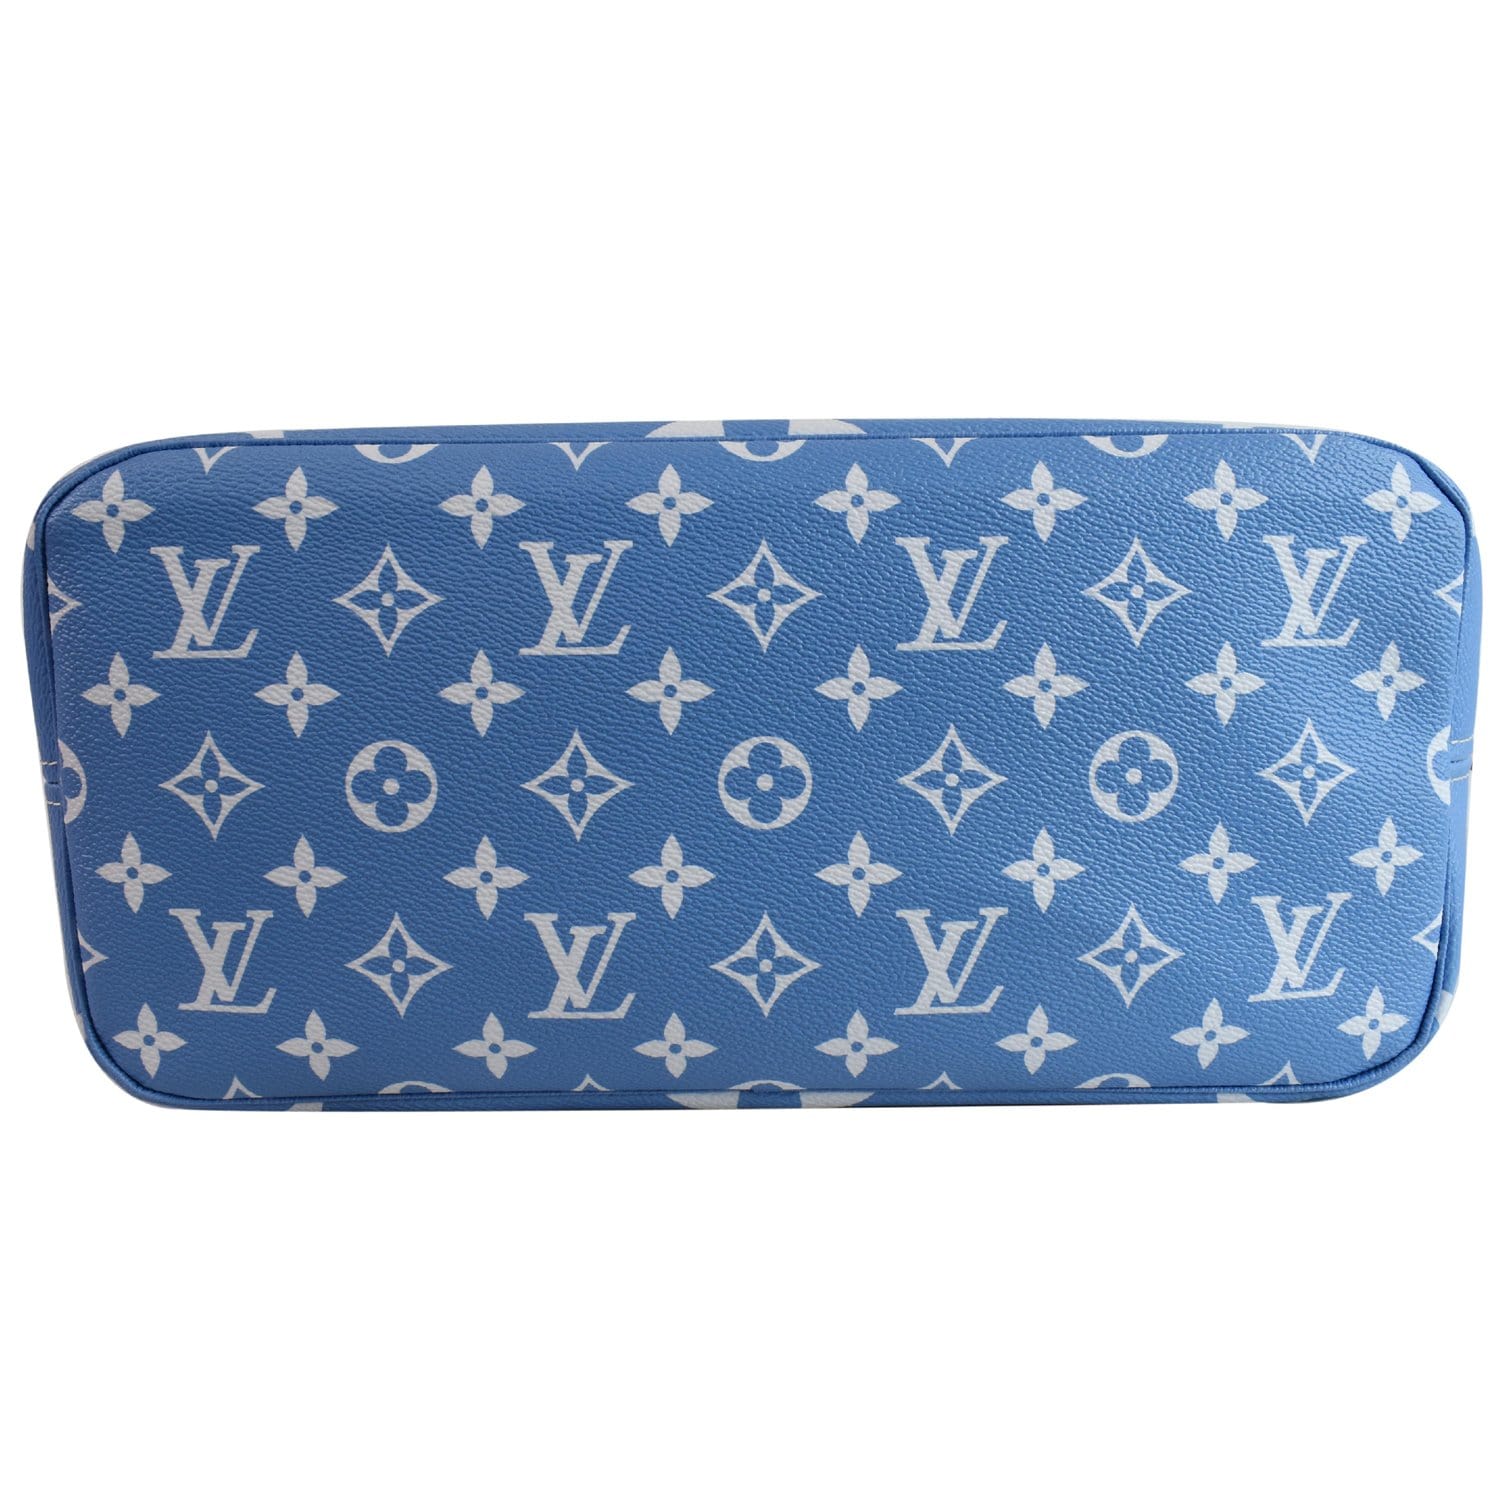 Louis Vuitton Blue Giant Monogram Coated Canvas By The Pool Neverfull MM  Gold Hardware Available For Immediate Sale At Sotheby's